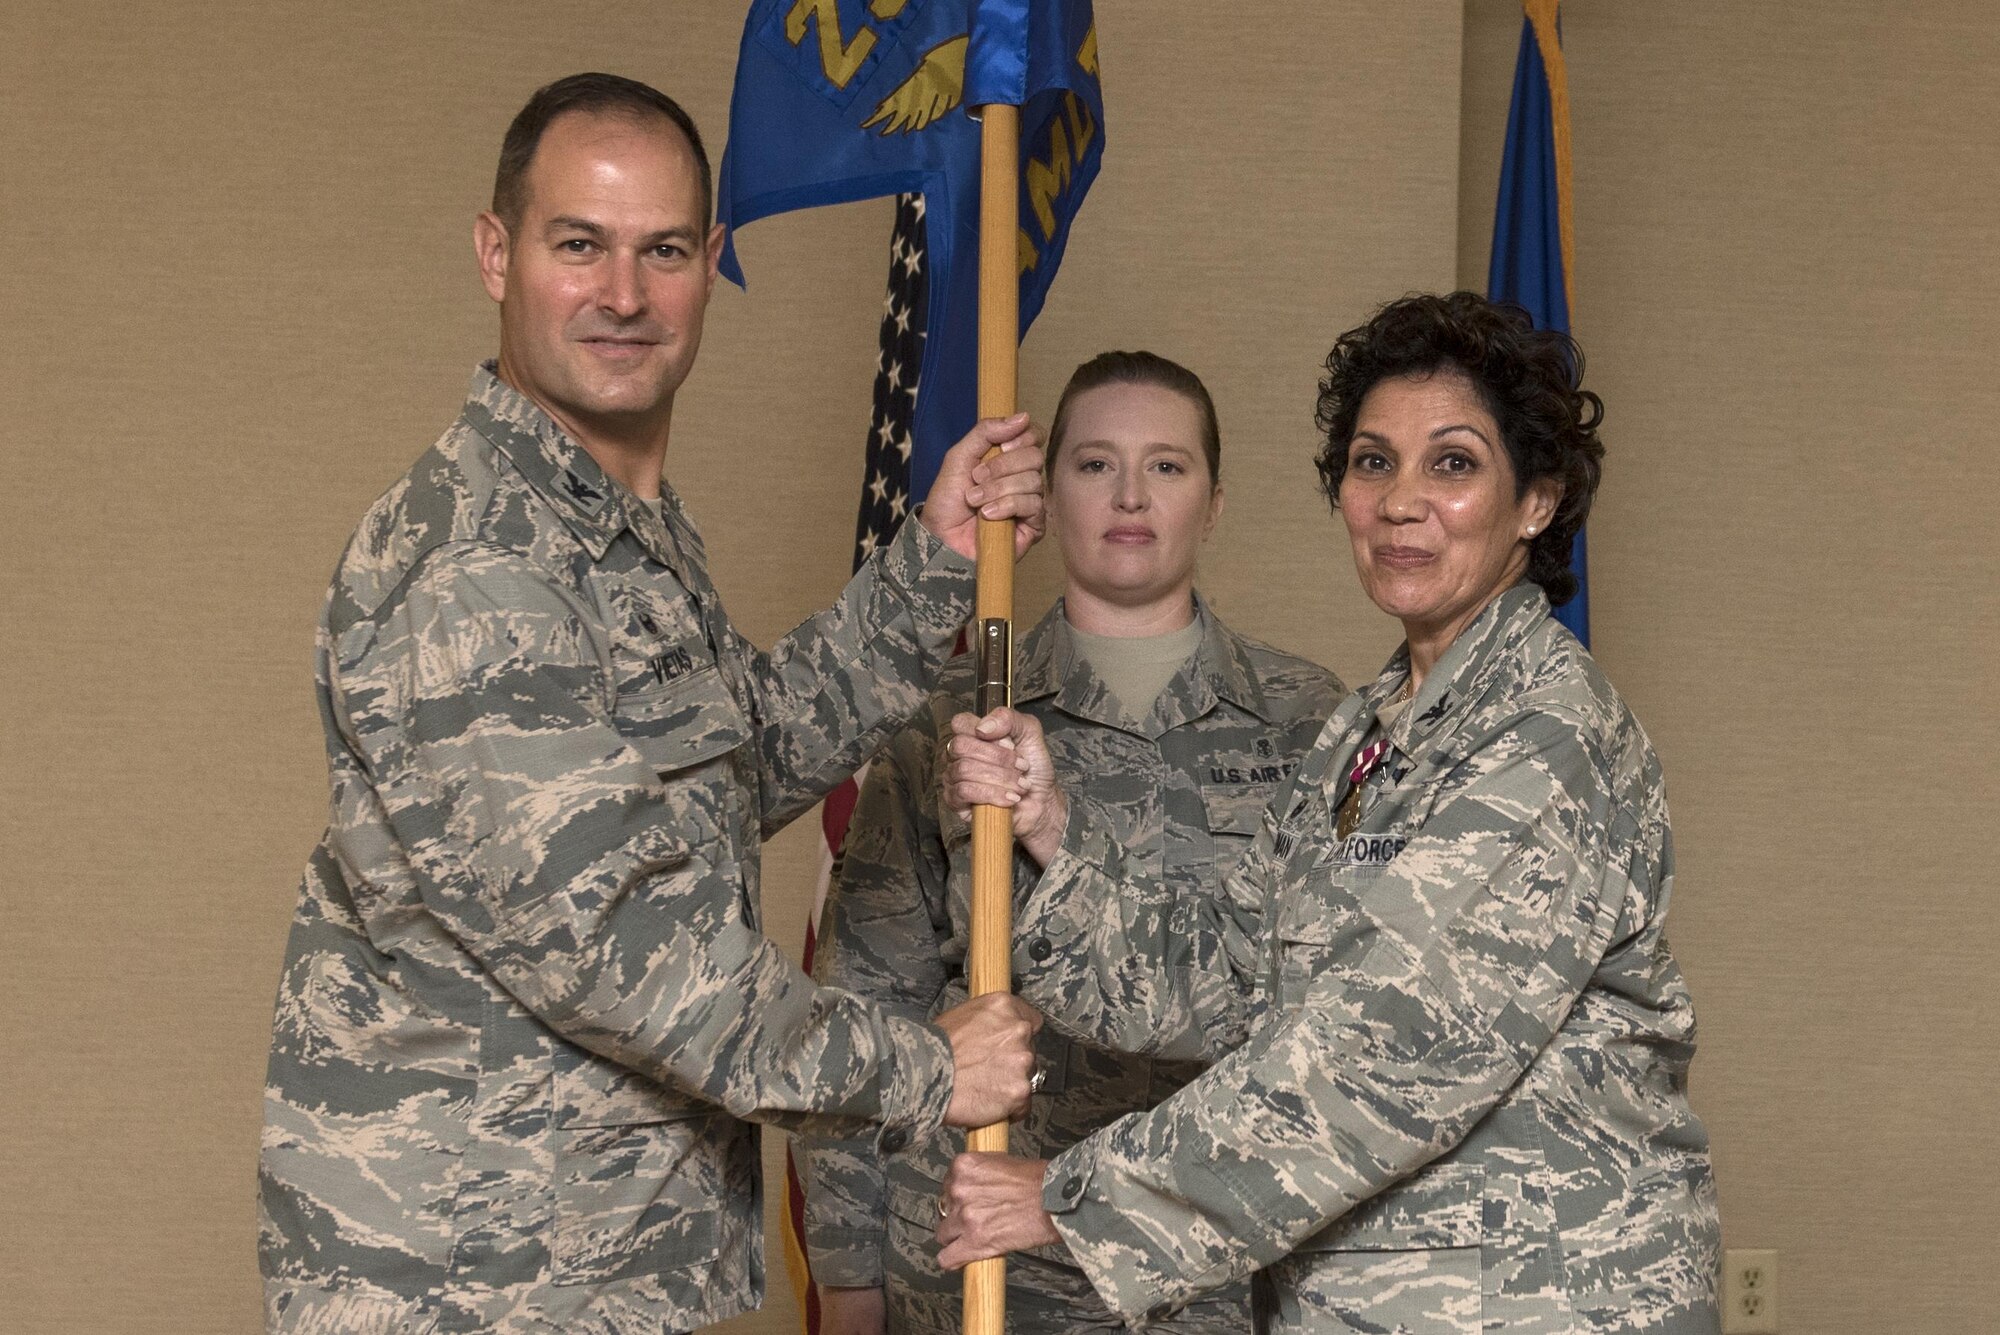 Col. Jay Vietas, left, 23d Medical Group commander, receives the guidon from Col. Yvette Guzman, outgoing 23d Aerospace Medicine Squadron commander, during a change of command ceremony, July 20, 2017, at Moody Air Force Base, Ga. Guzman will assume command at Kirkland AFB, New Mexico, where she will serve as the Chief of the Inspection and Training Division. (U.S. Air Force photo by Airman 1st Class Destiney Masse)